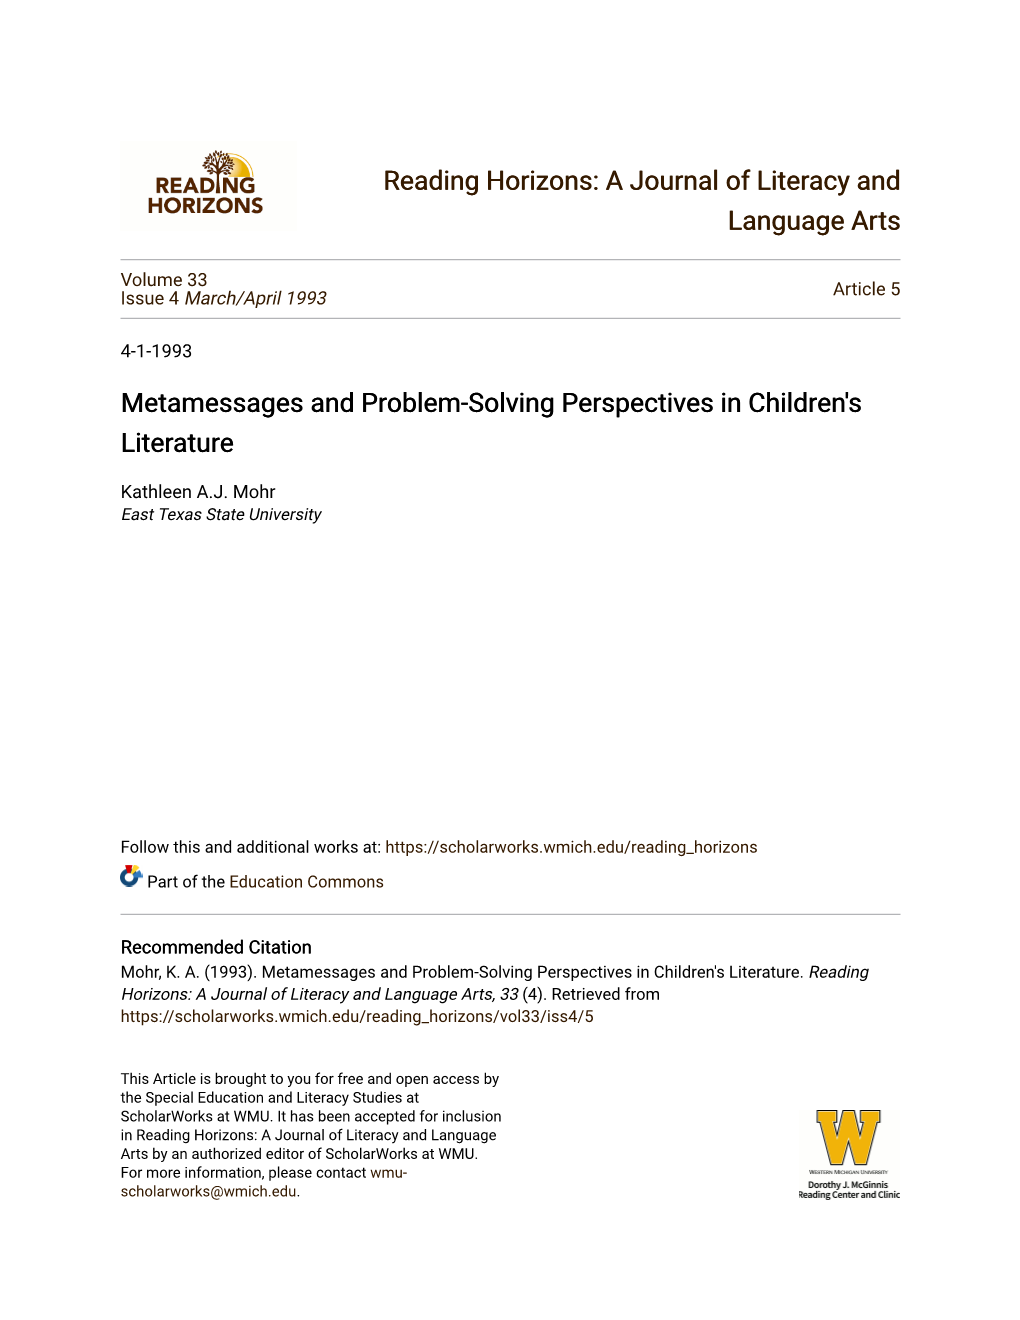 Metamessages and Problem-Solving Perspectives in Children's Literature